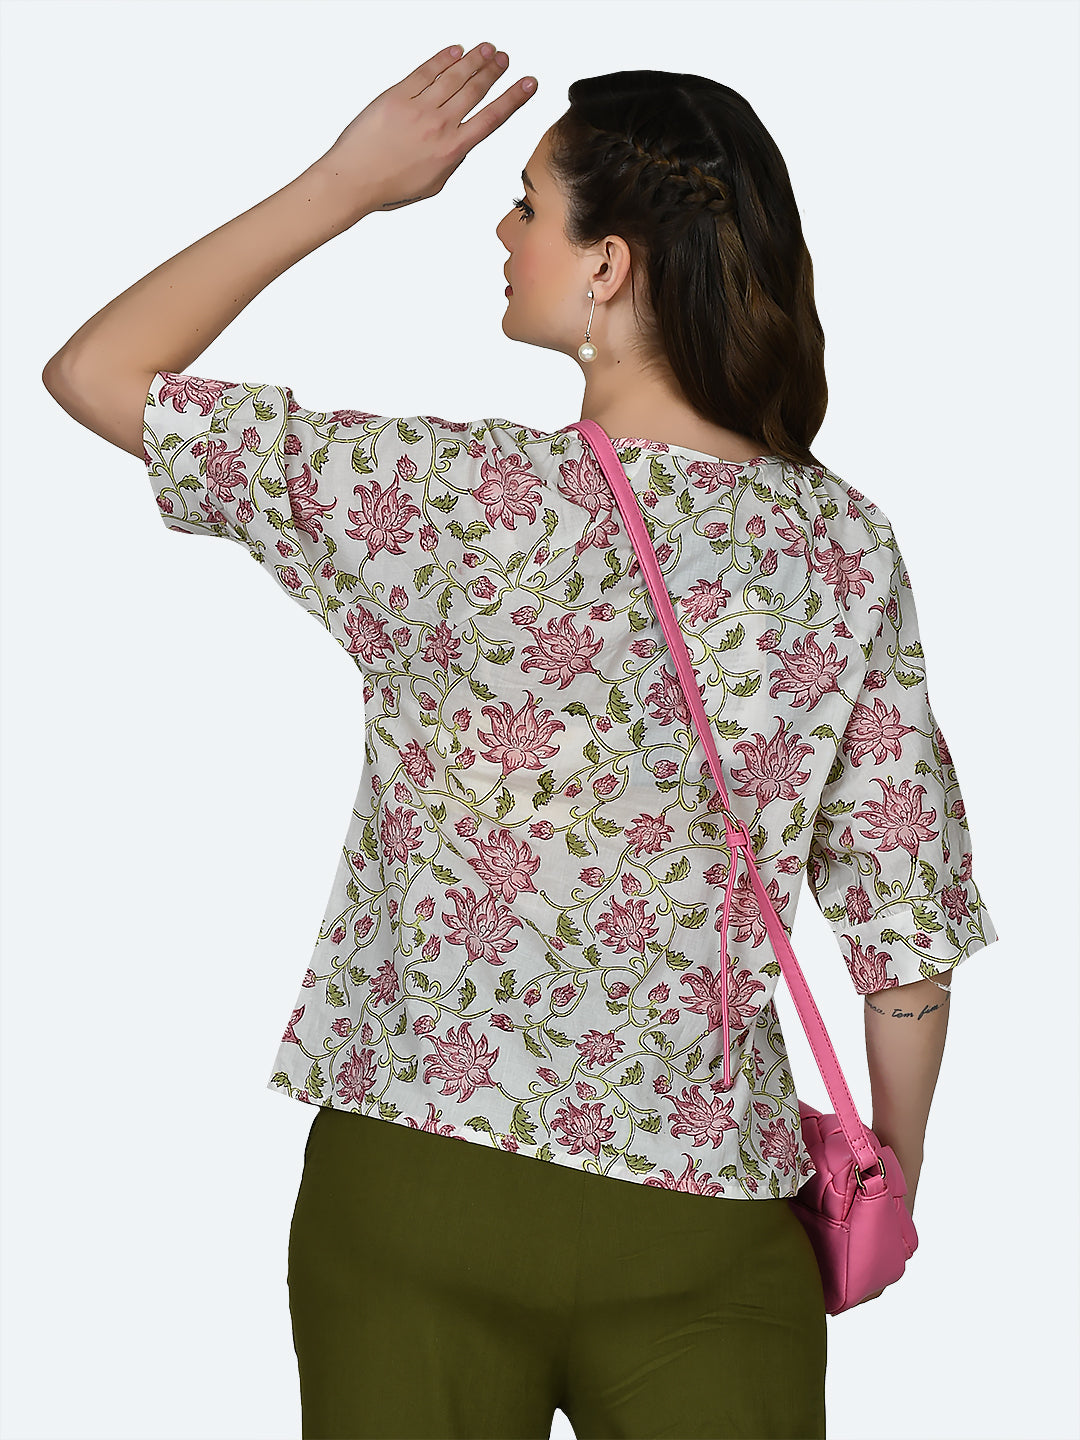 White Floral Print Top For Women